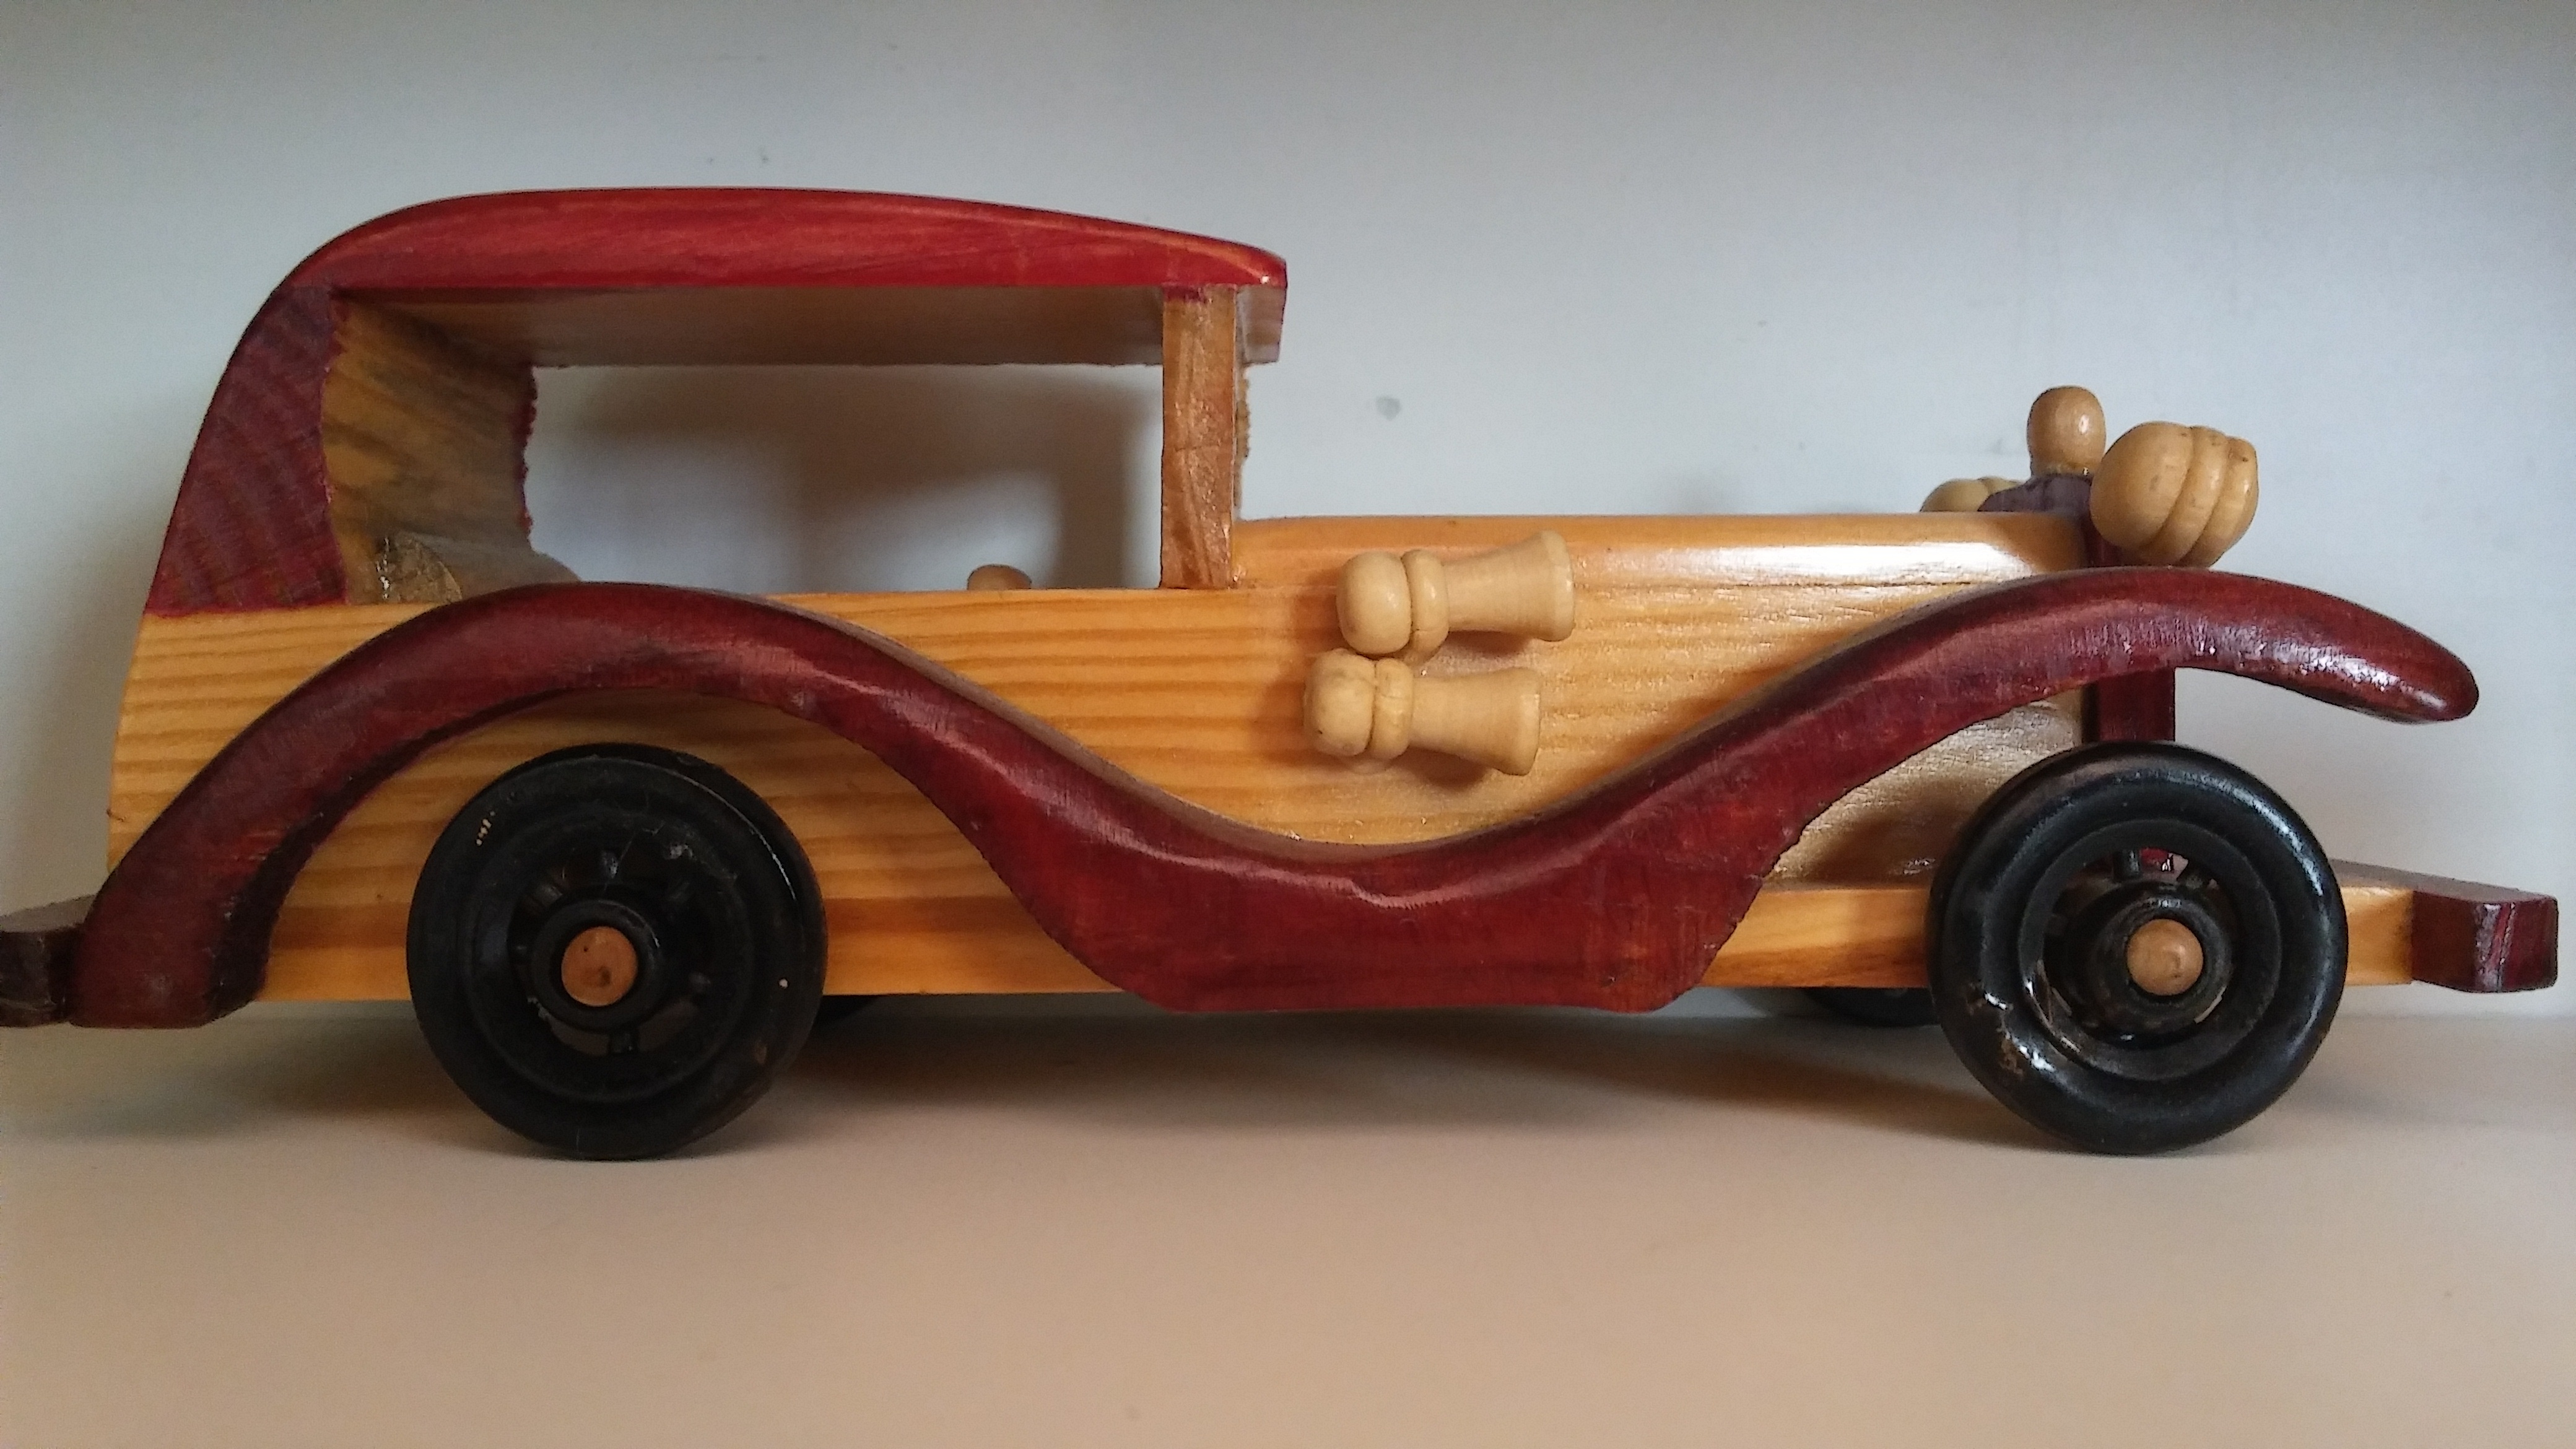 Free Images : toy, childhood, vintage car, toys, classic, model car ...